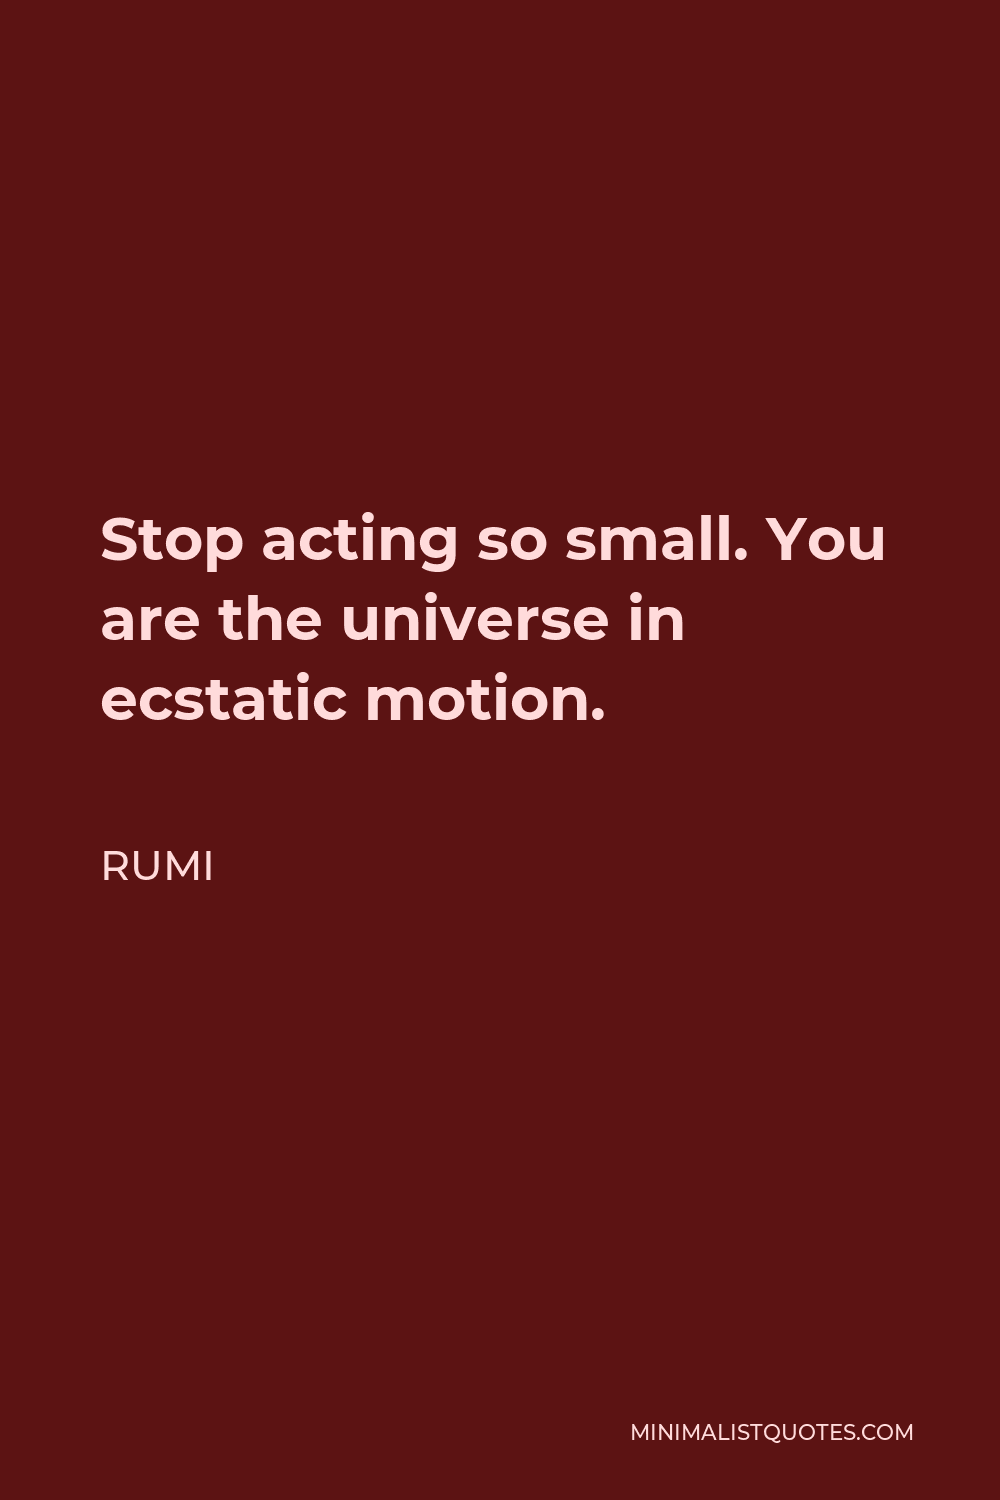 Rumi Quote - Stop acting so small. You are the universe in ecstatic motion.